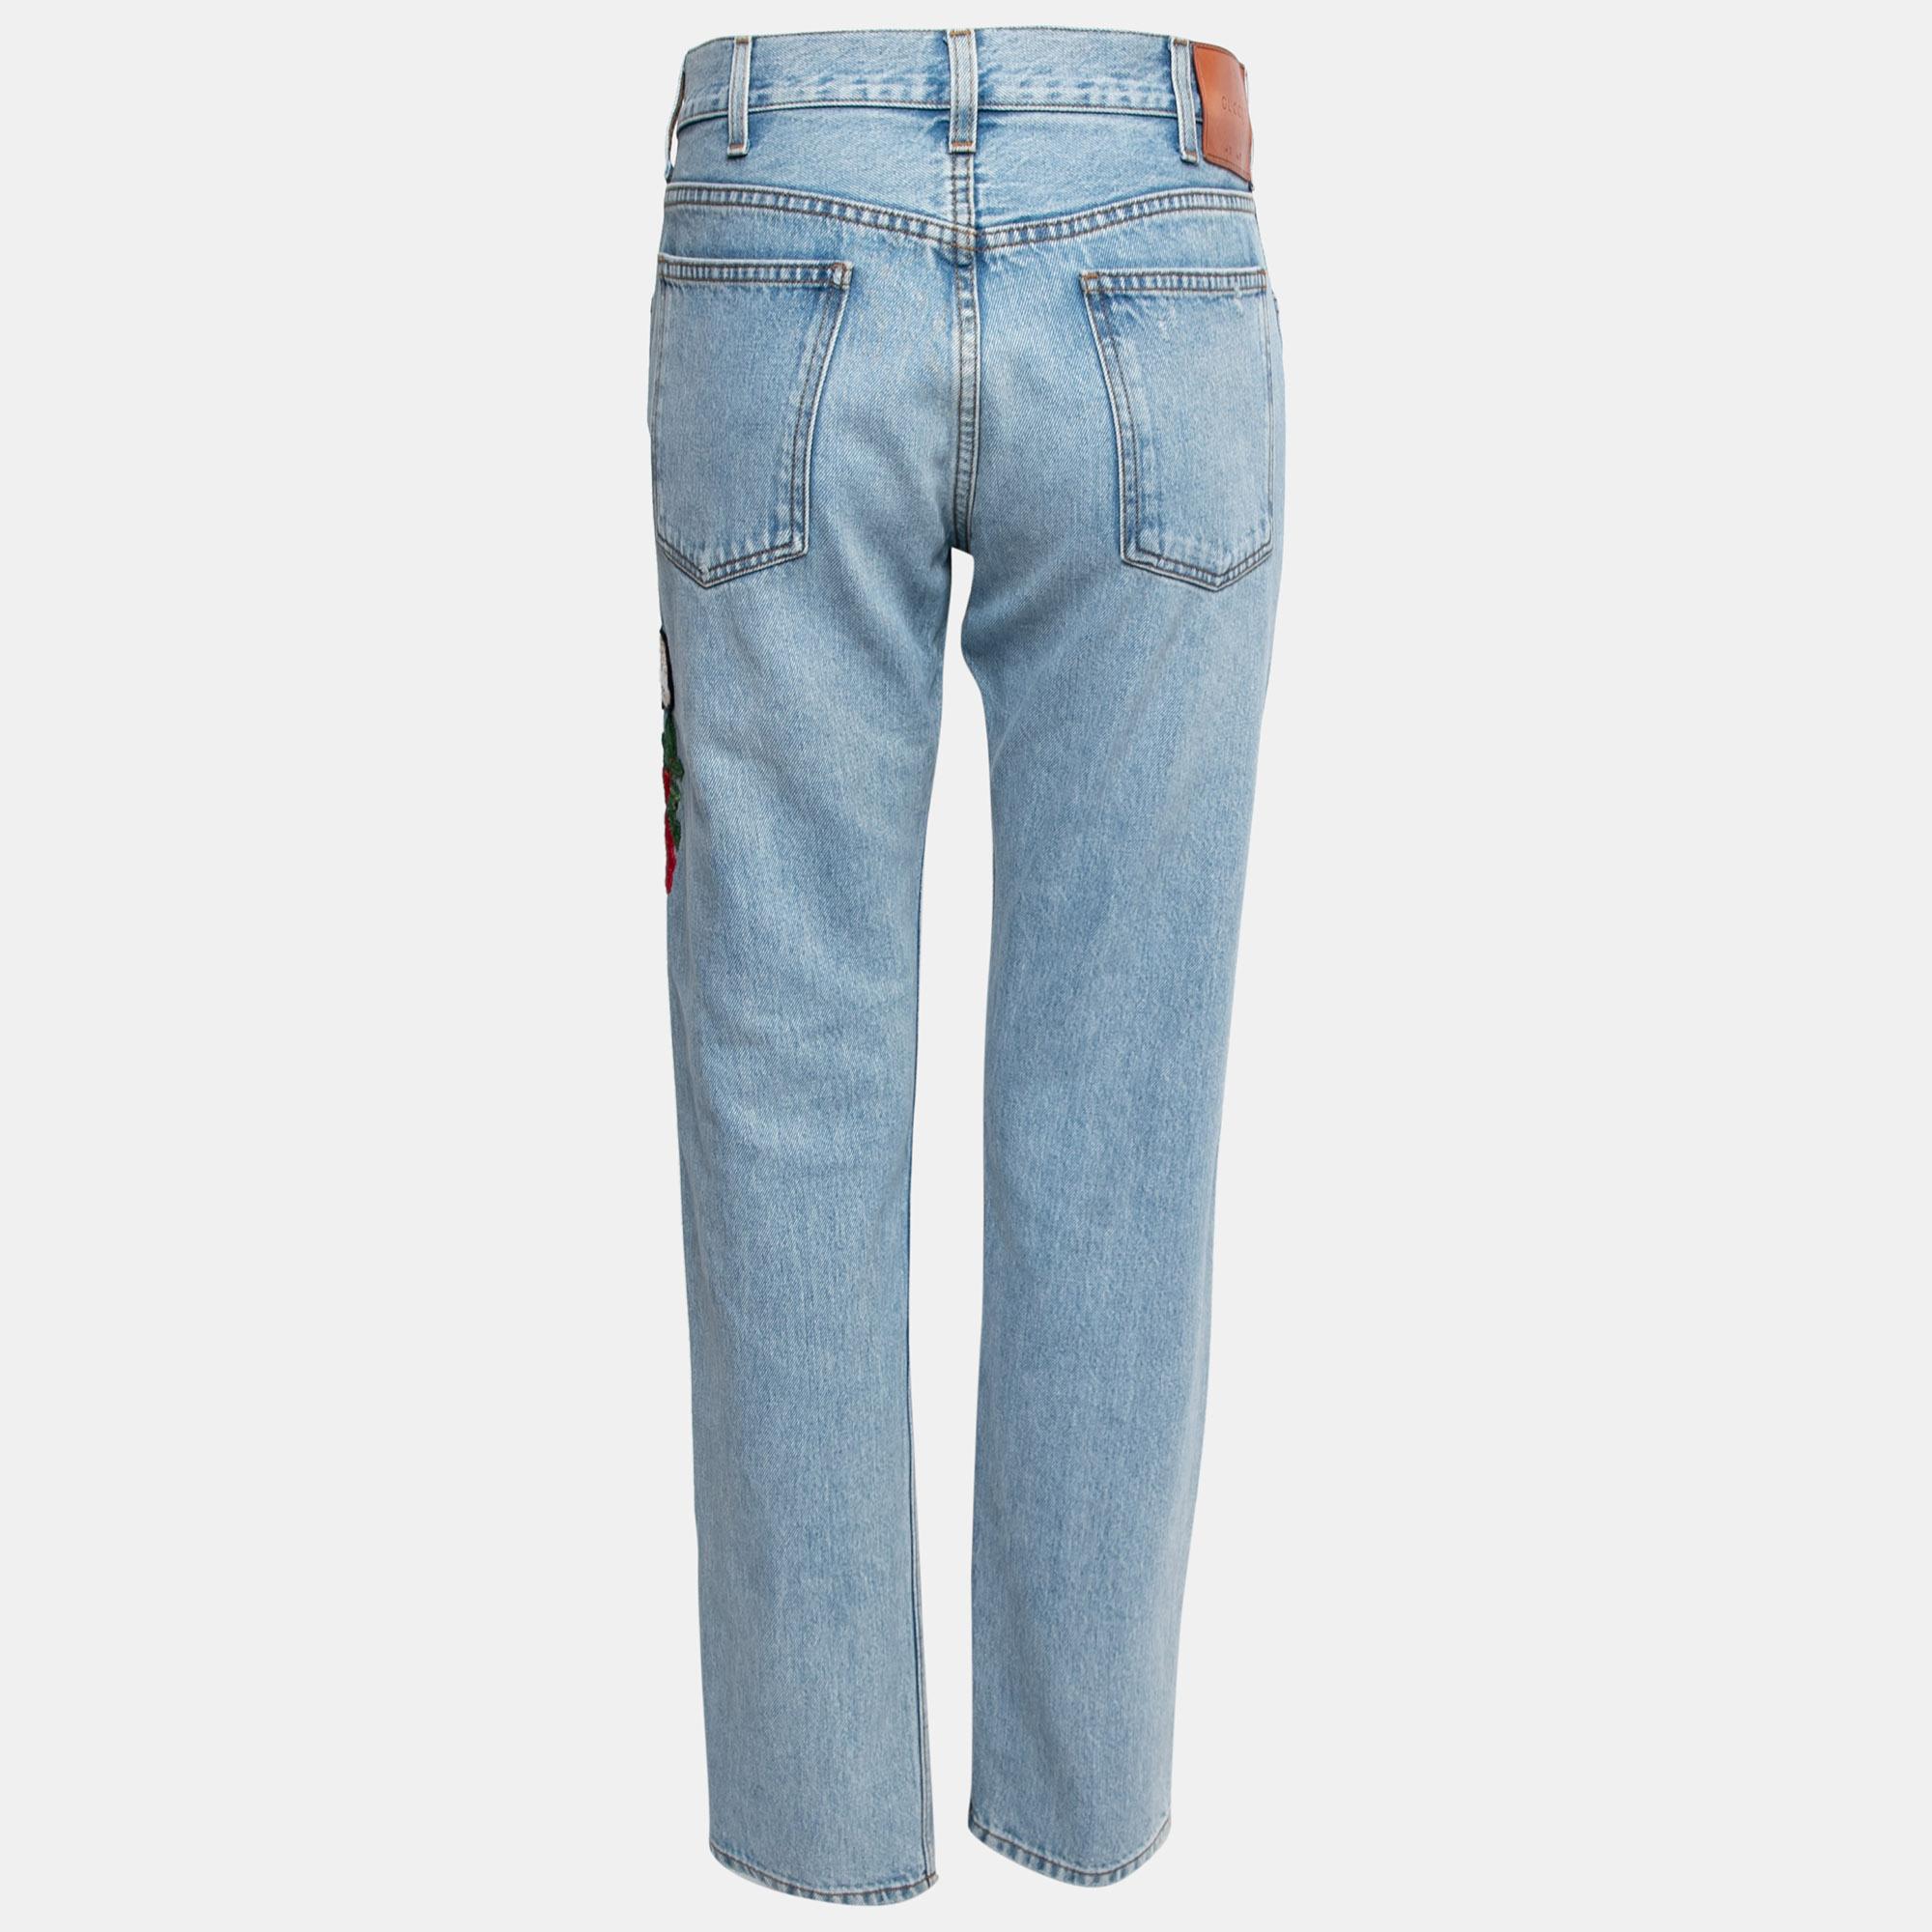 Comfy and classy jeans like these are a closet necessity! These jeans from Gucci are super stylish and chic! They are fashioned in blue denim fabric into a tapered silhouette. They are decorated with floral and Bee embroidery. These jeans are